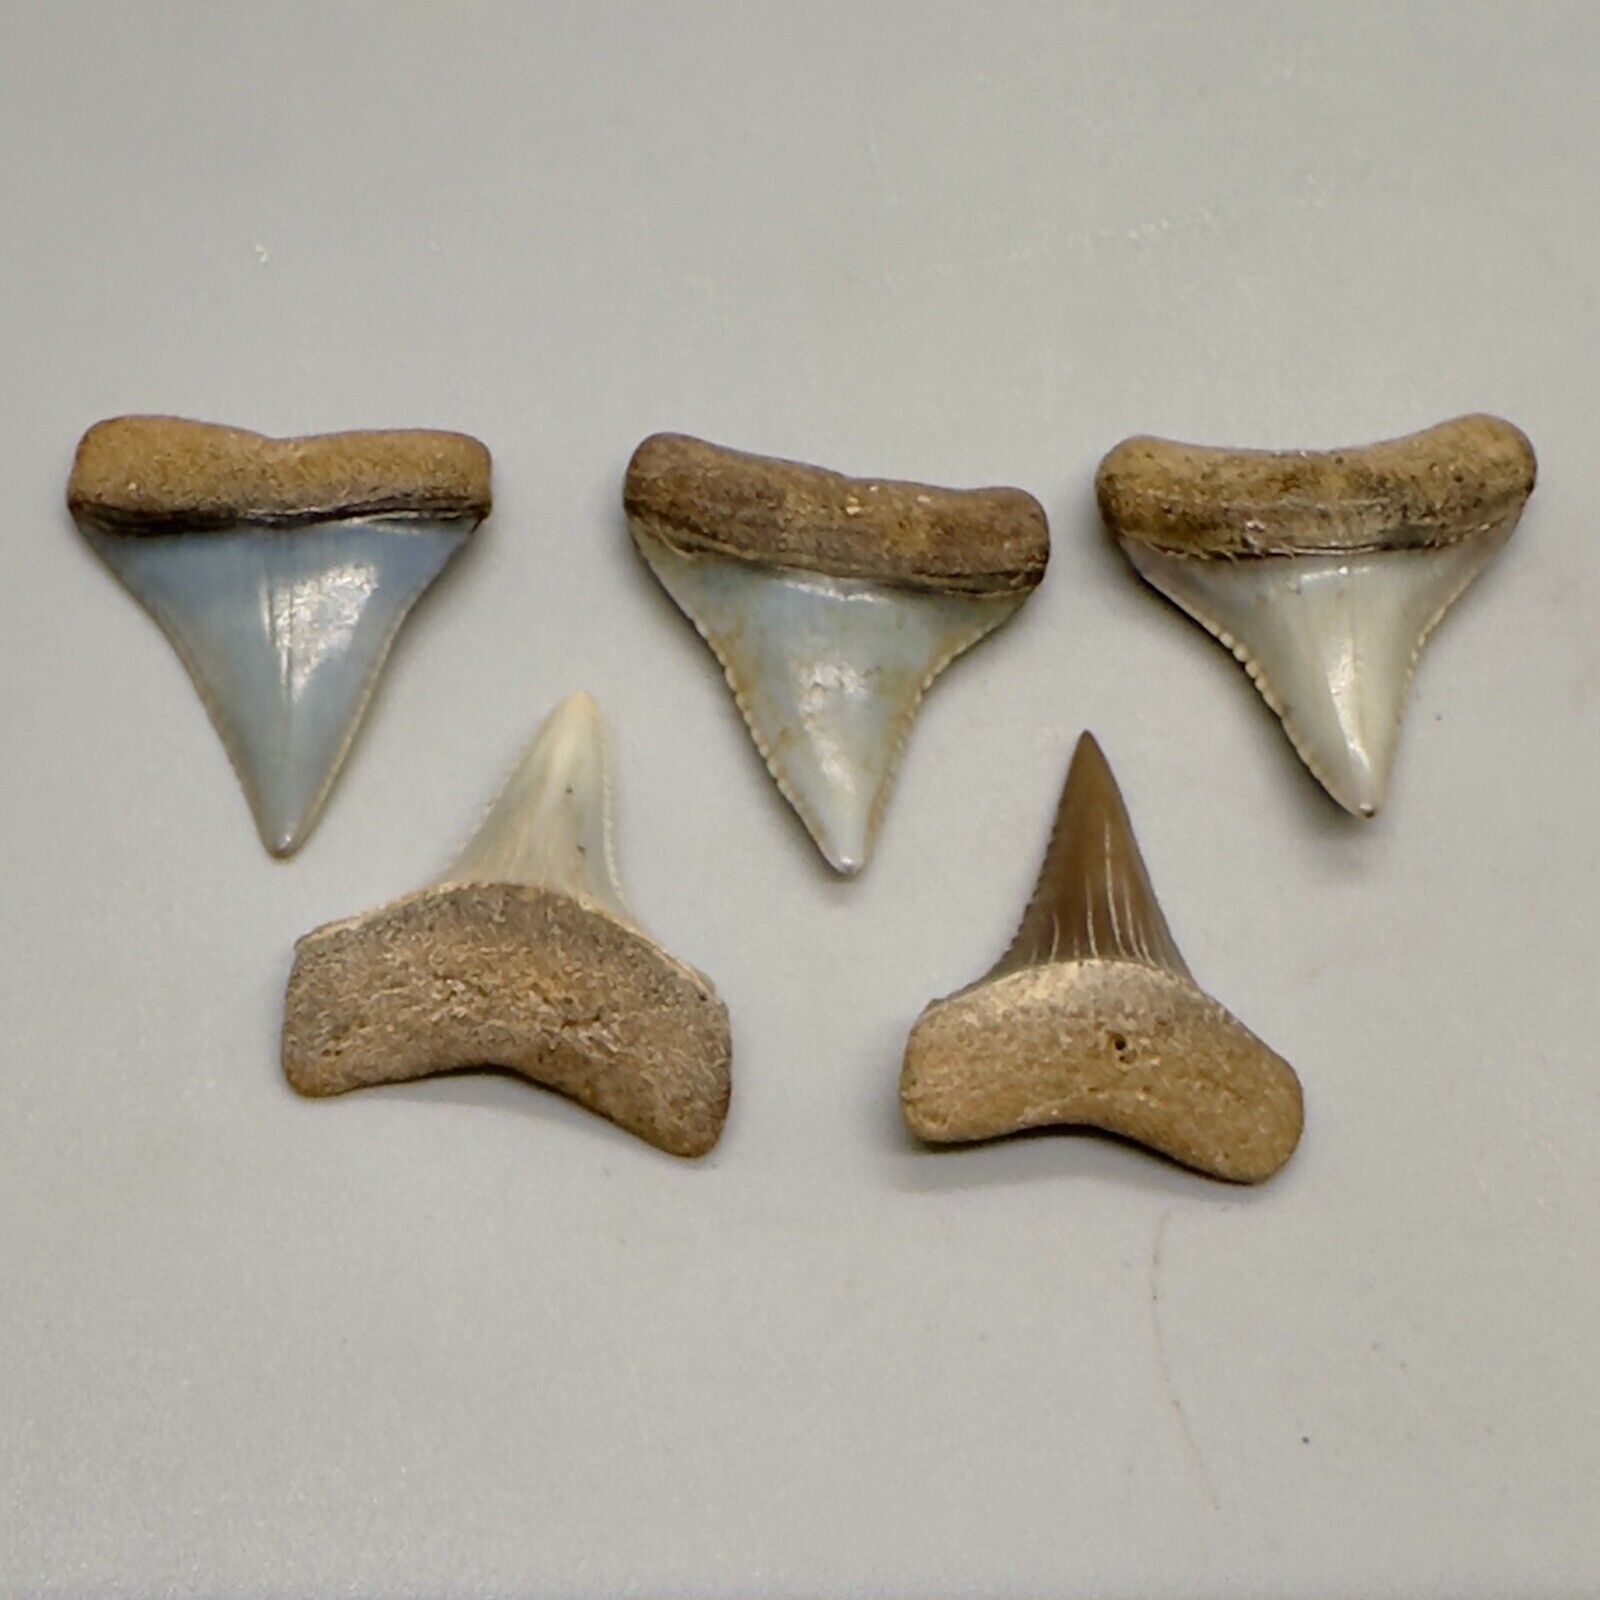 Group of 5 Very Colorful Fossil GREAT WHITE Shark Teeth - Peru